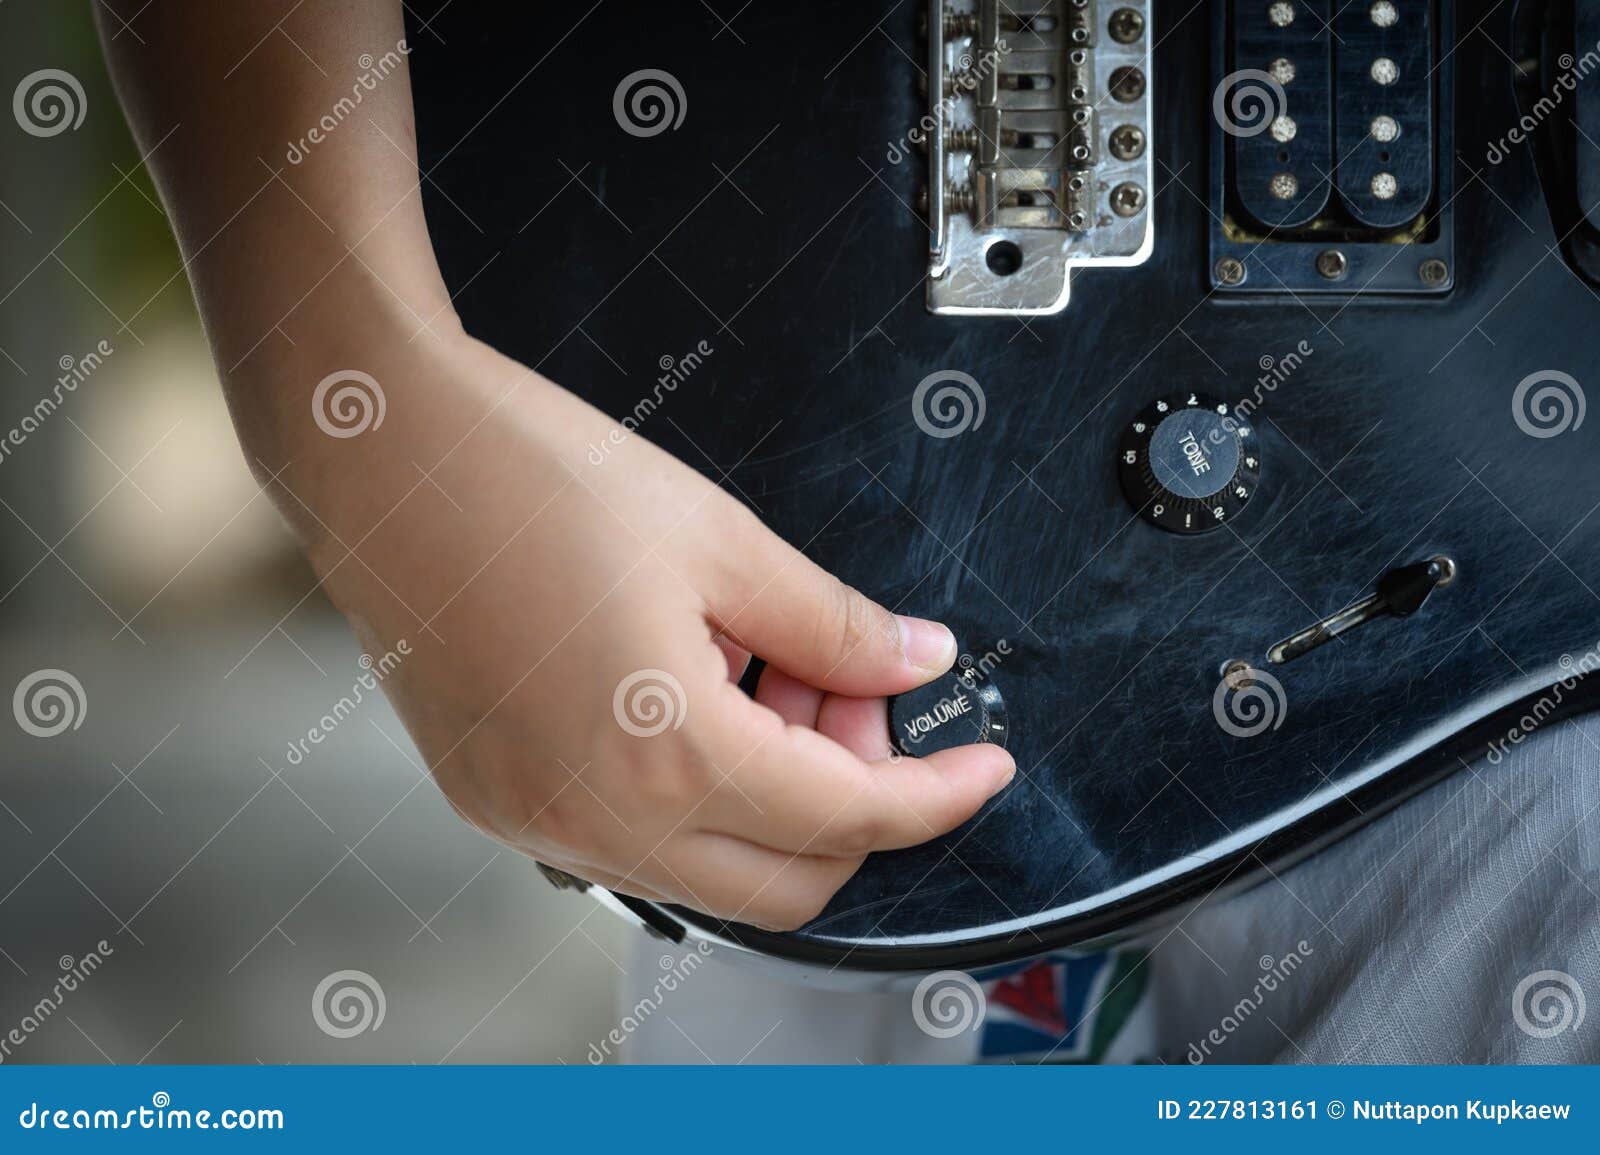 woman hand changing electric guitar settings. tuning a timbre regulator